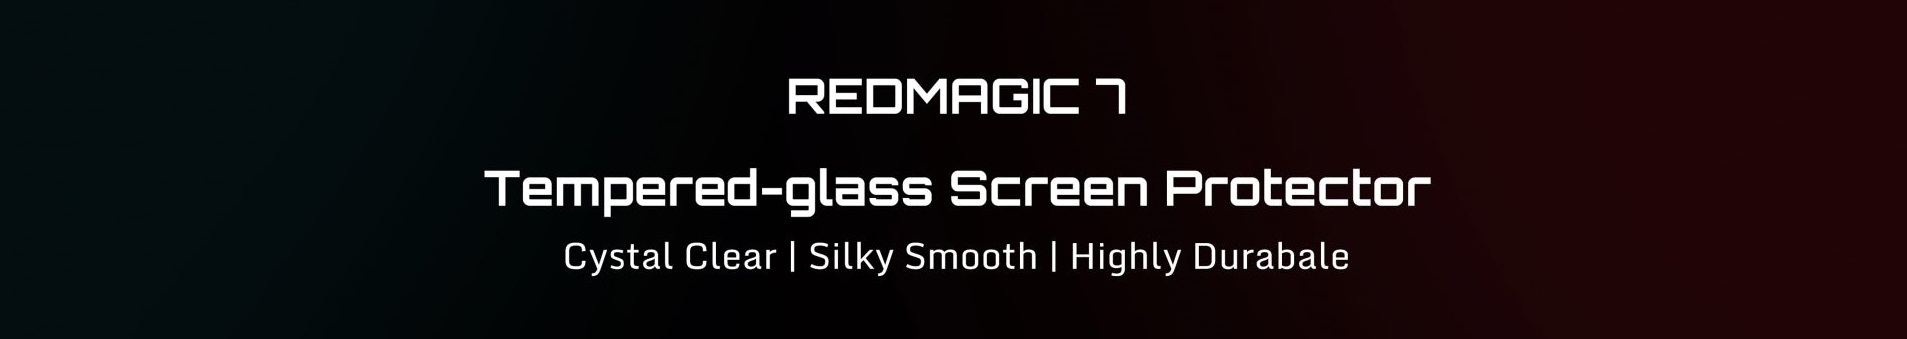 Red Magic 7 Tempered Glass Screen Protector